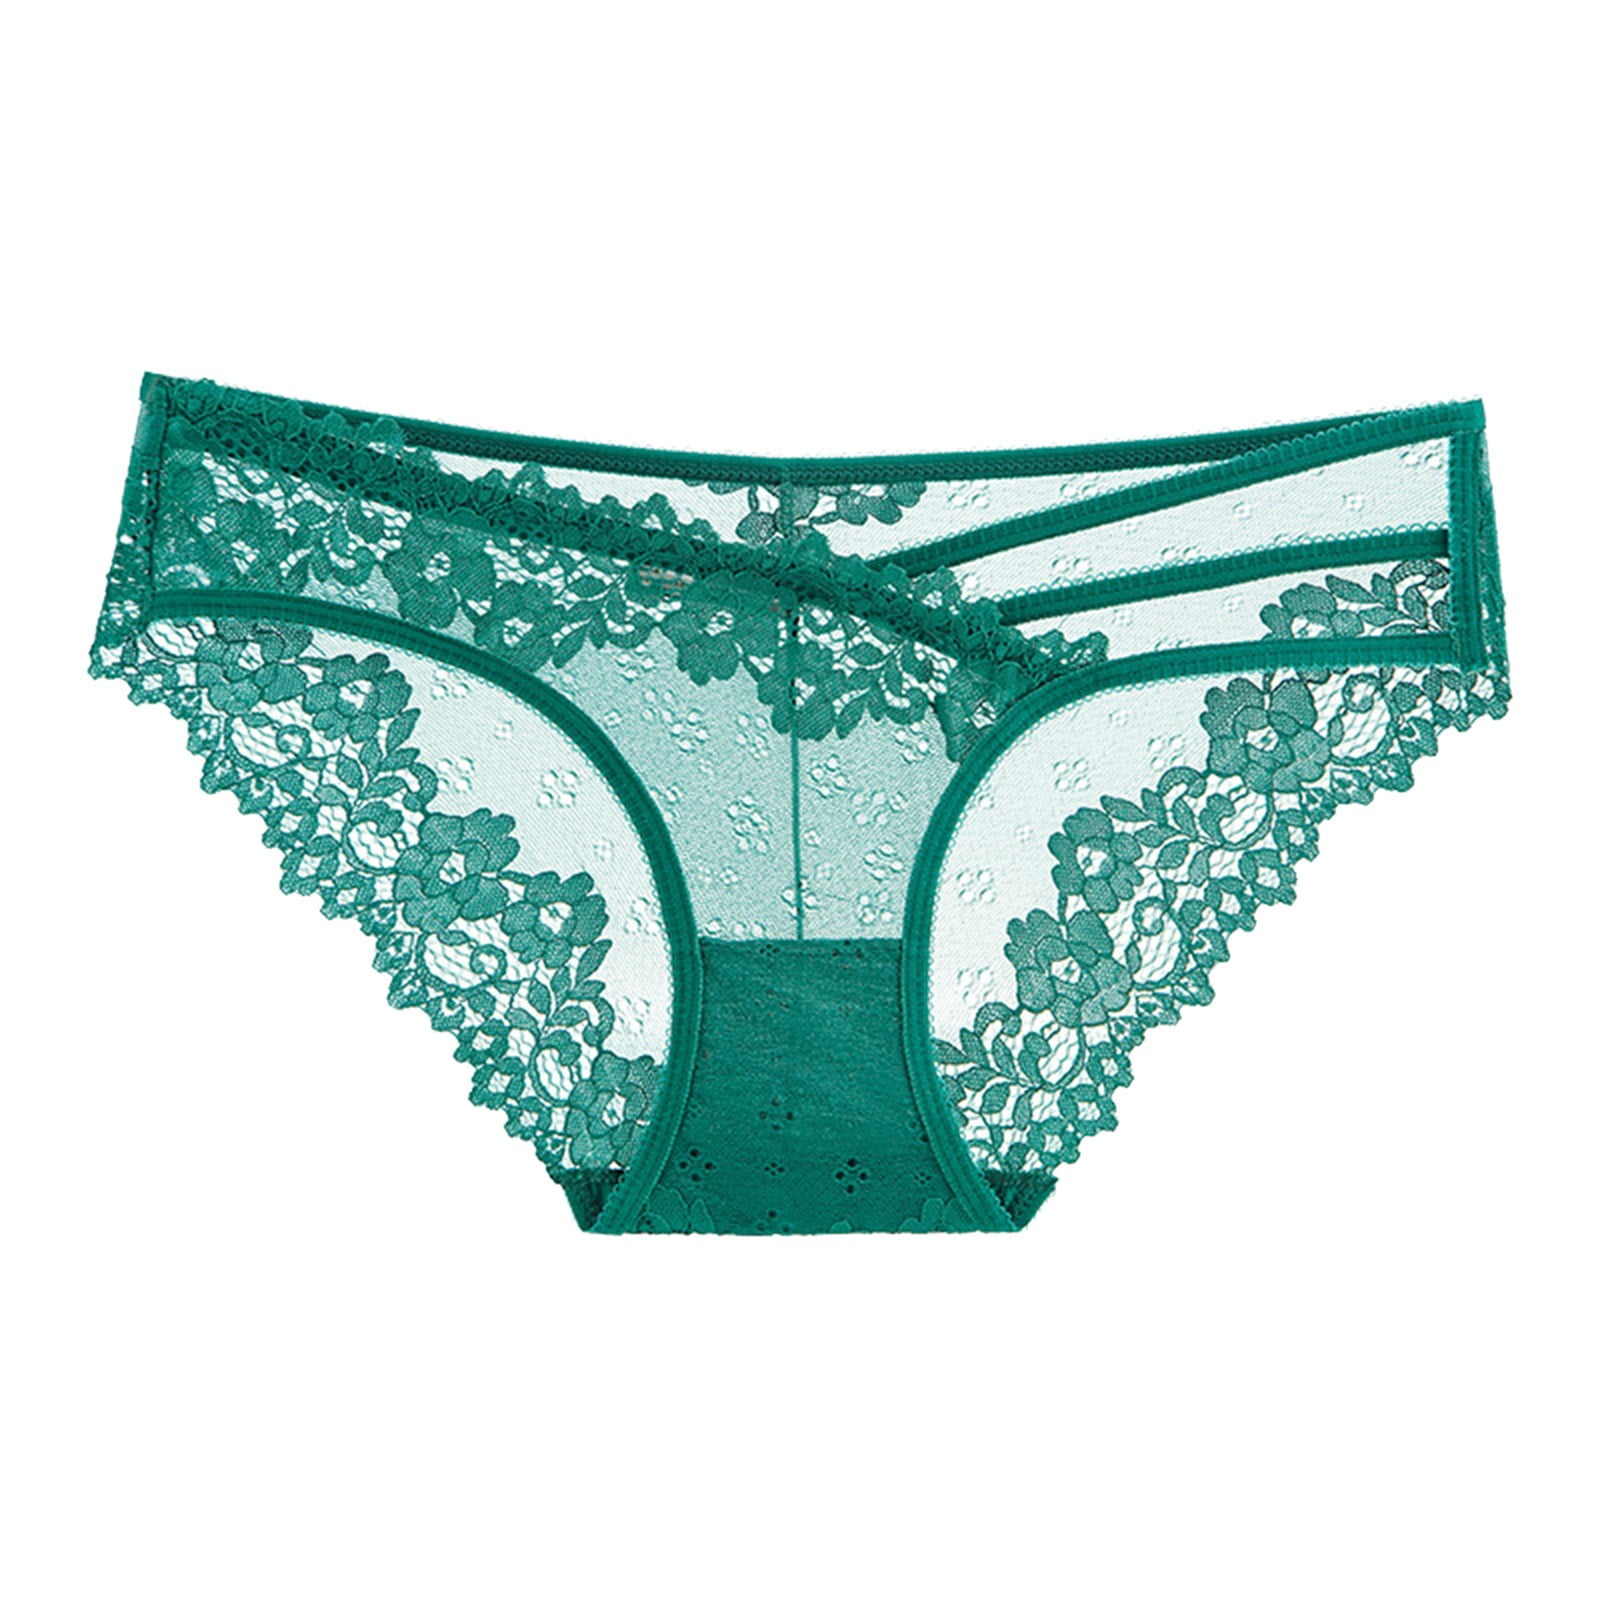 JDEFEG Thigh Chafing Underpants Lace Panties Underwear Panties Bikini Solid  Womens Briefs Knickers 1 Piece Women's Underwear Plus Size Lace Green S